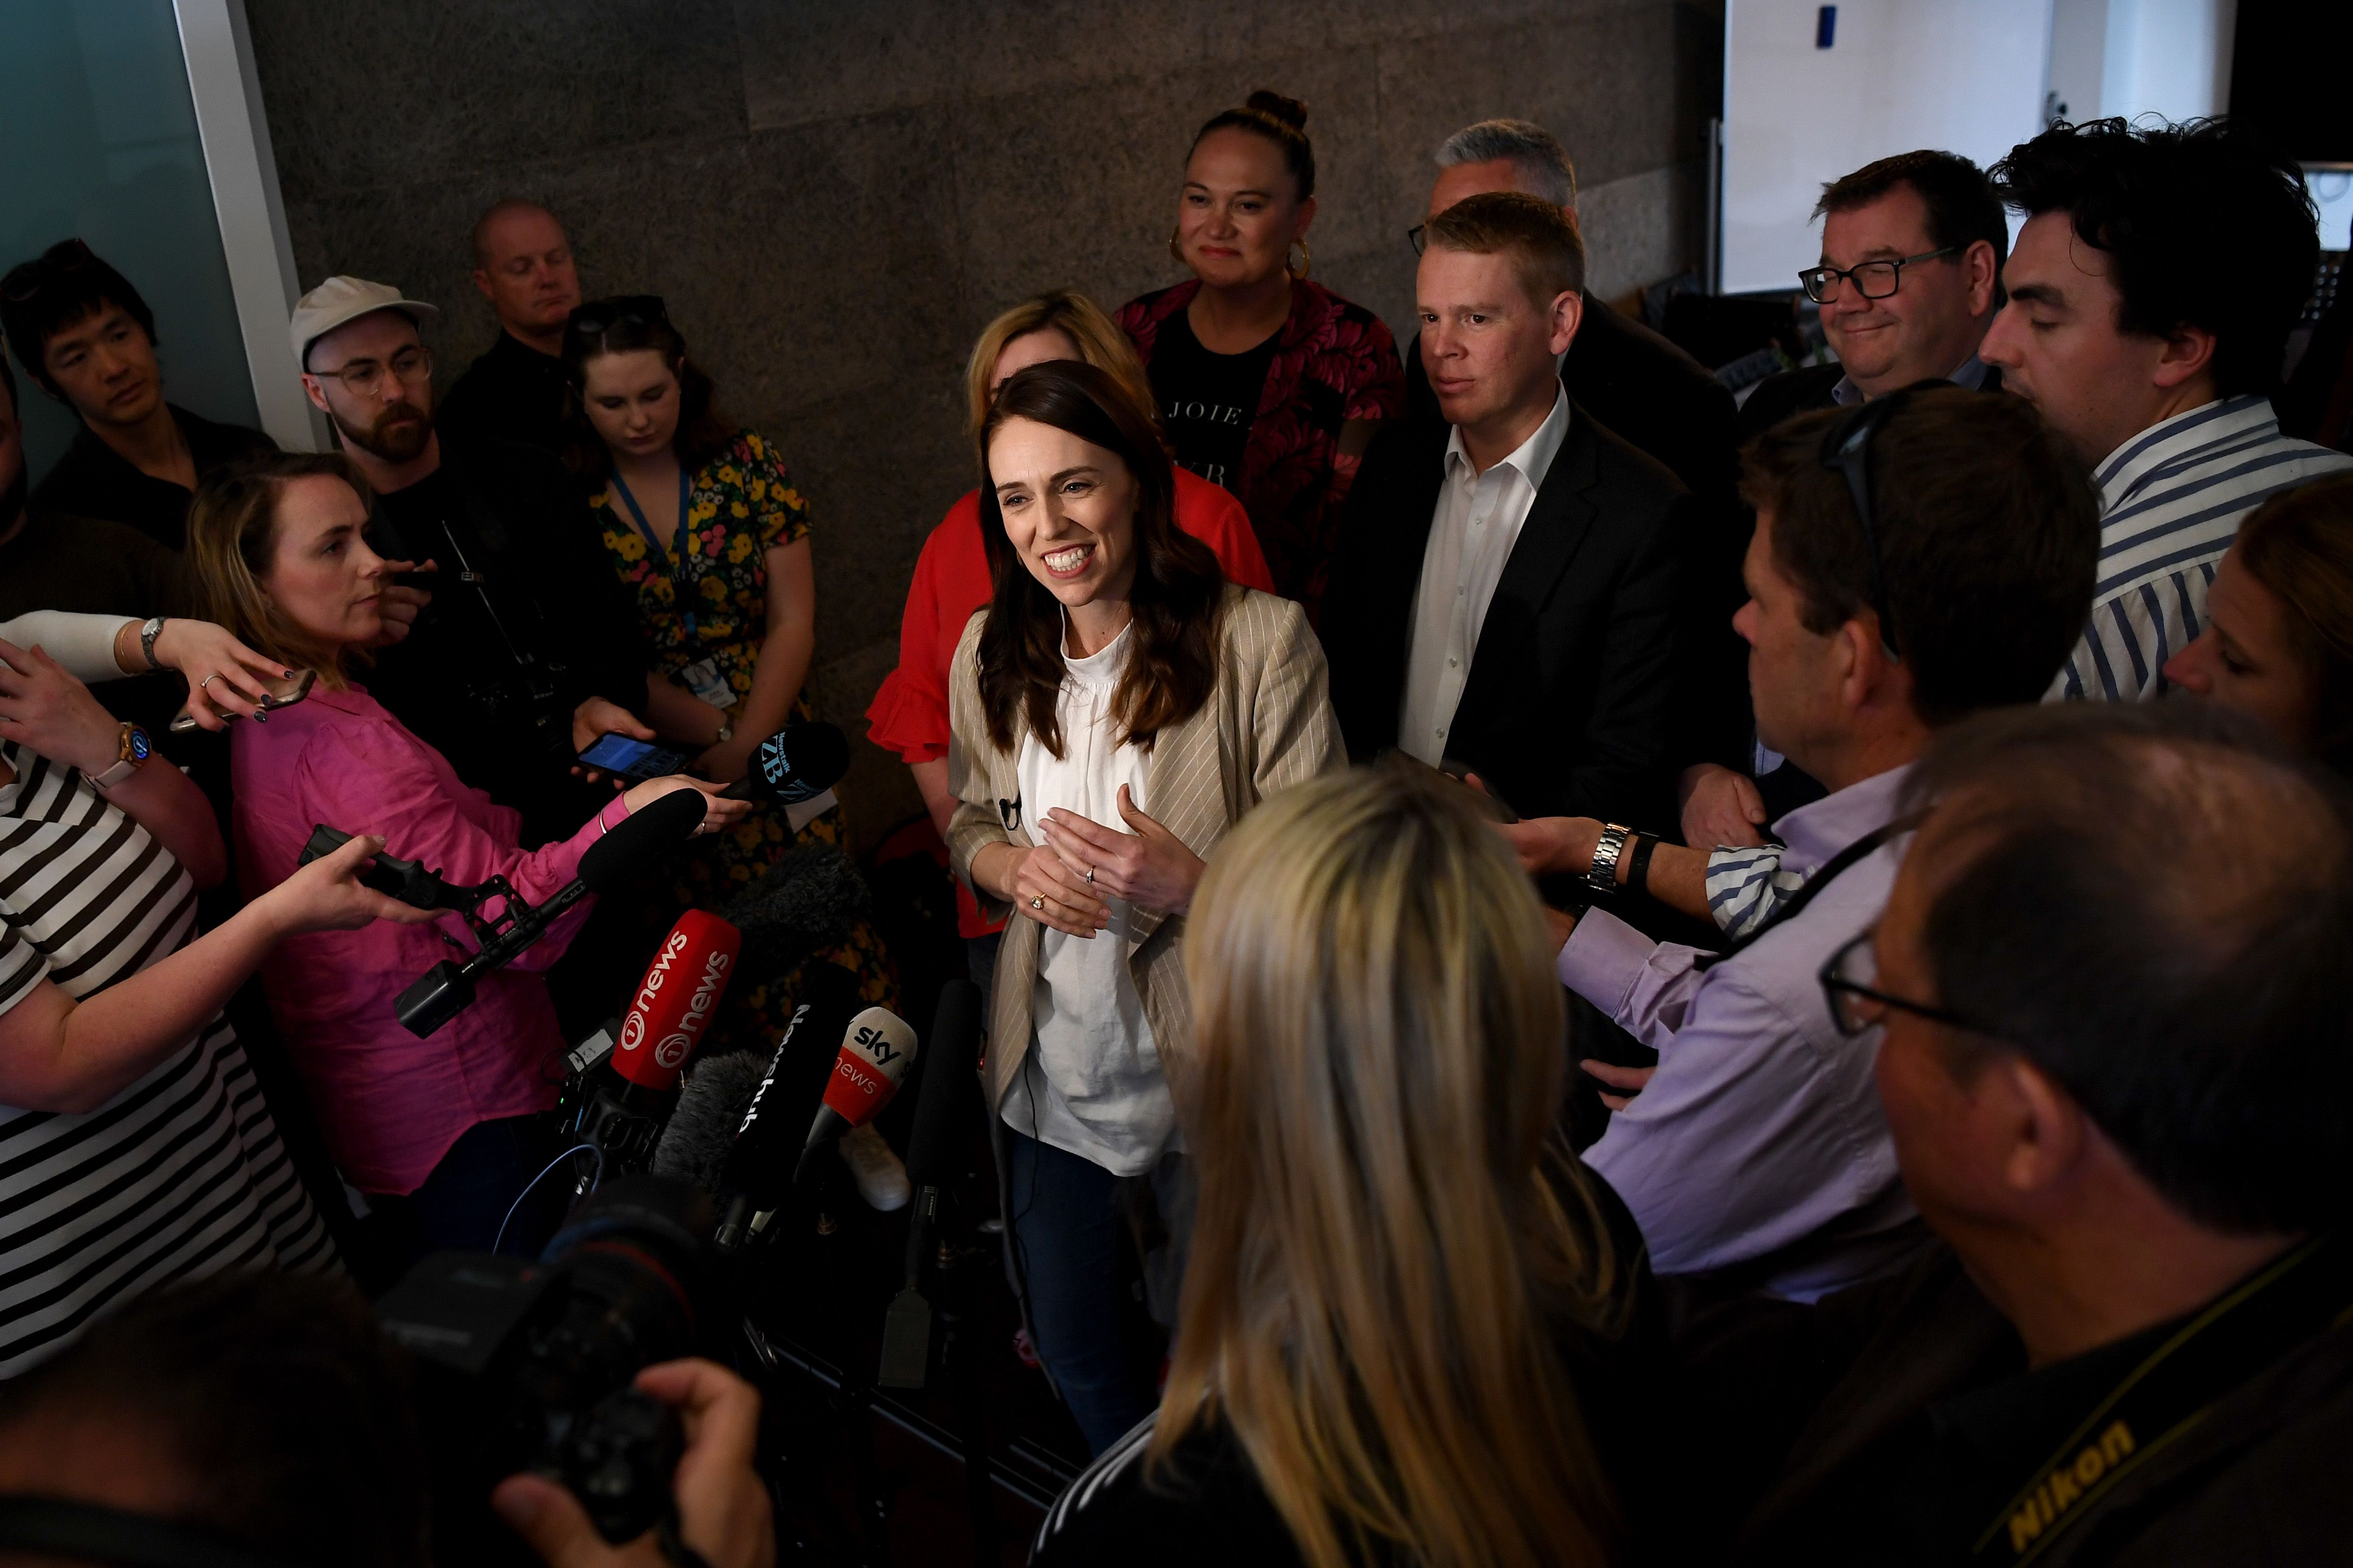 New Zealand Prime Minister Jacinda Ardern holds a press conference after meeting with members of her party on October 18, 2020 in Auckland, New Zealand.